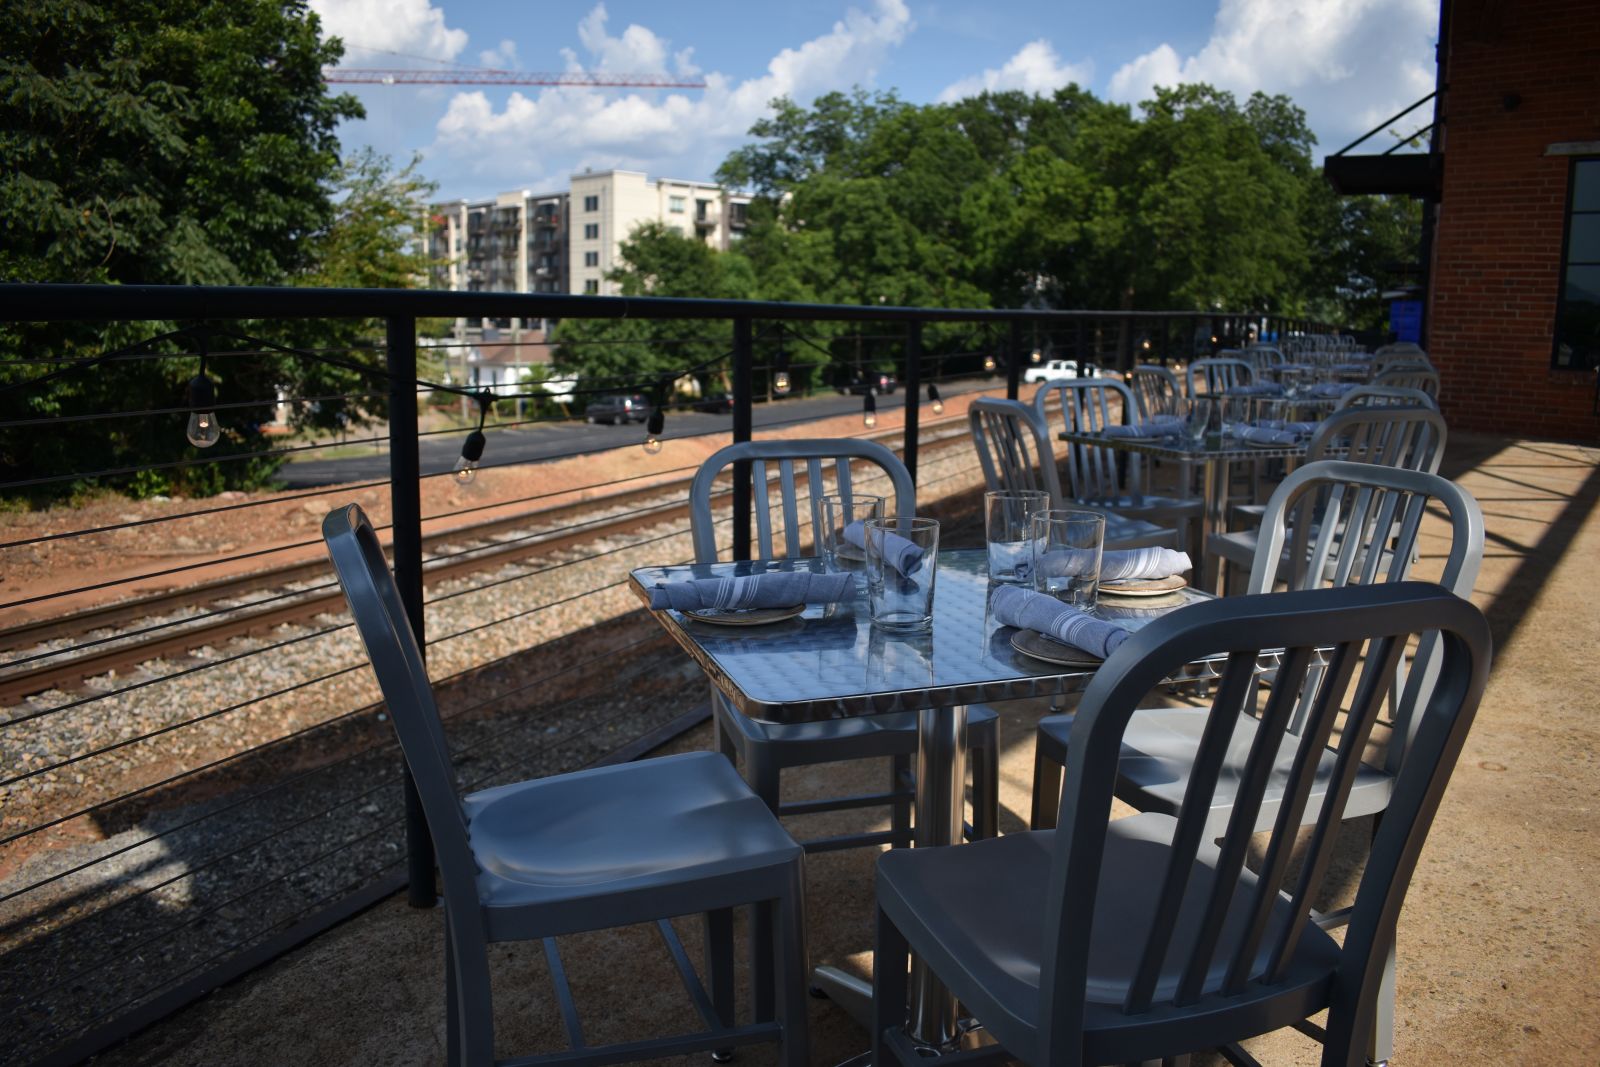 Out of all cities on the list, Greenville has the highest number of restaurants per capita. (Photo/Molly Hulsey)